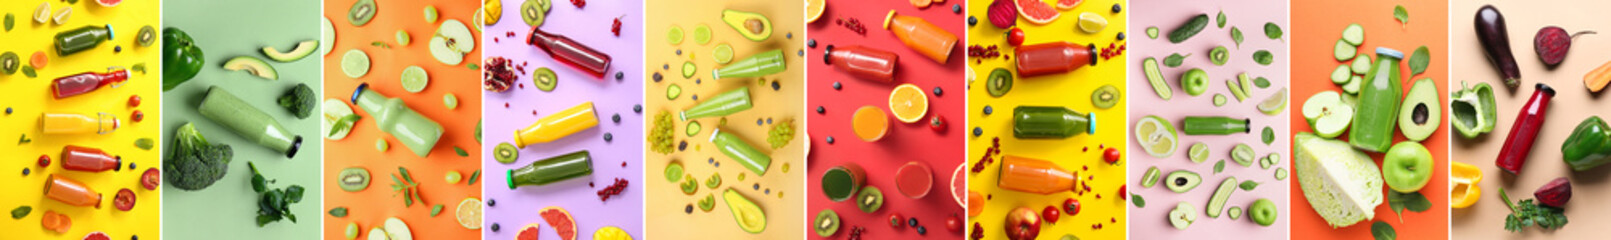 Collage of bottles with detox beverages on color background, top view